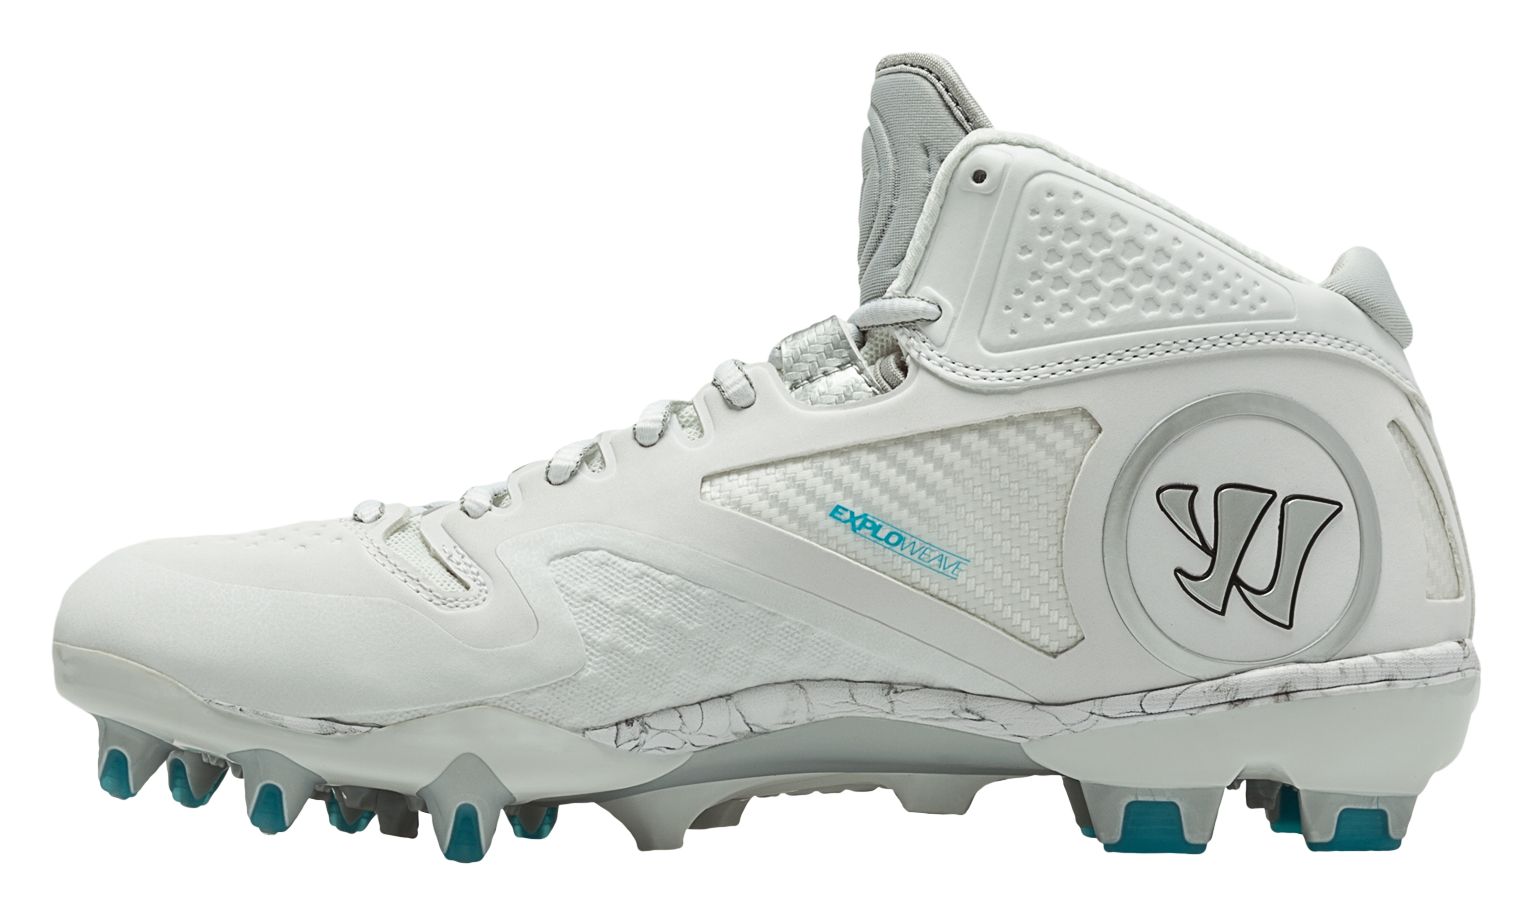 Adonis 2.0 Cleat, White with Silver image number 1